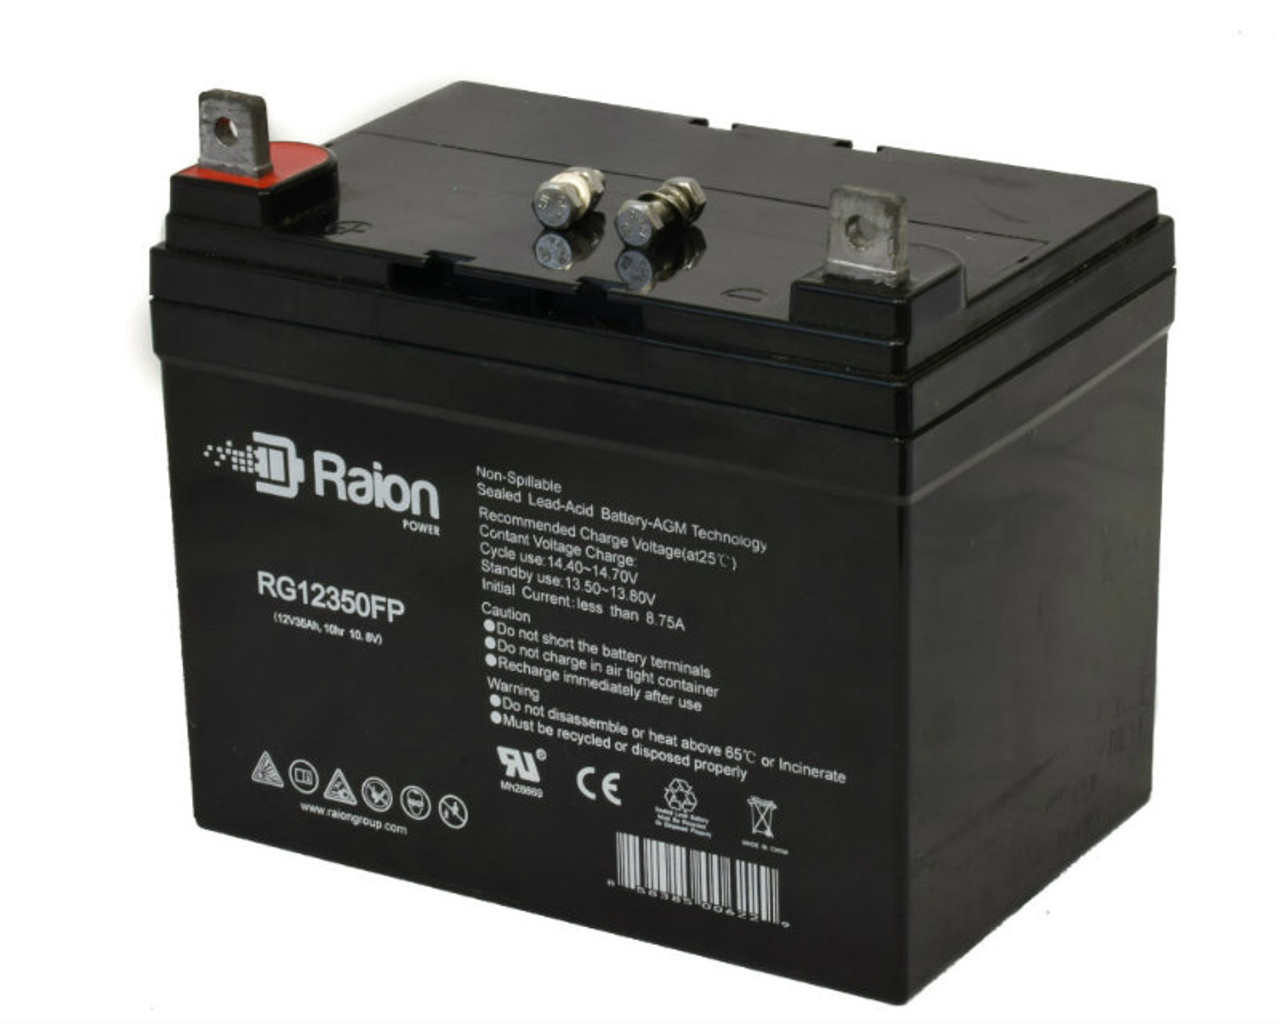 Raion Power Replacement 12V 35Ah RG12350FP Mobility Scooter Battery for DCC Shoprider Streamer 888WA